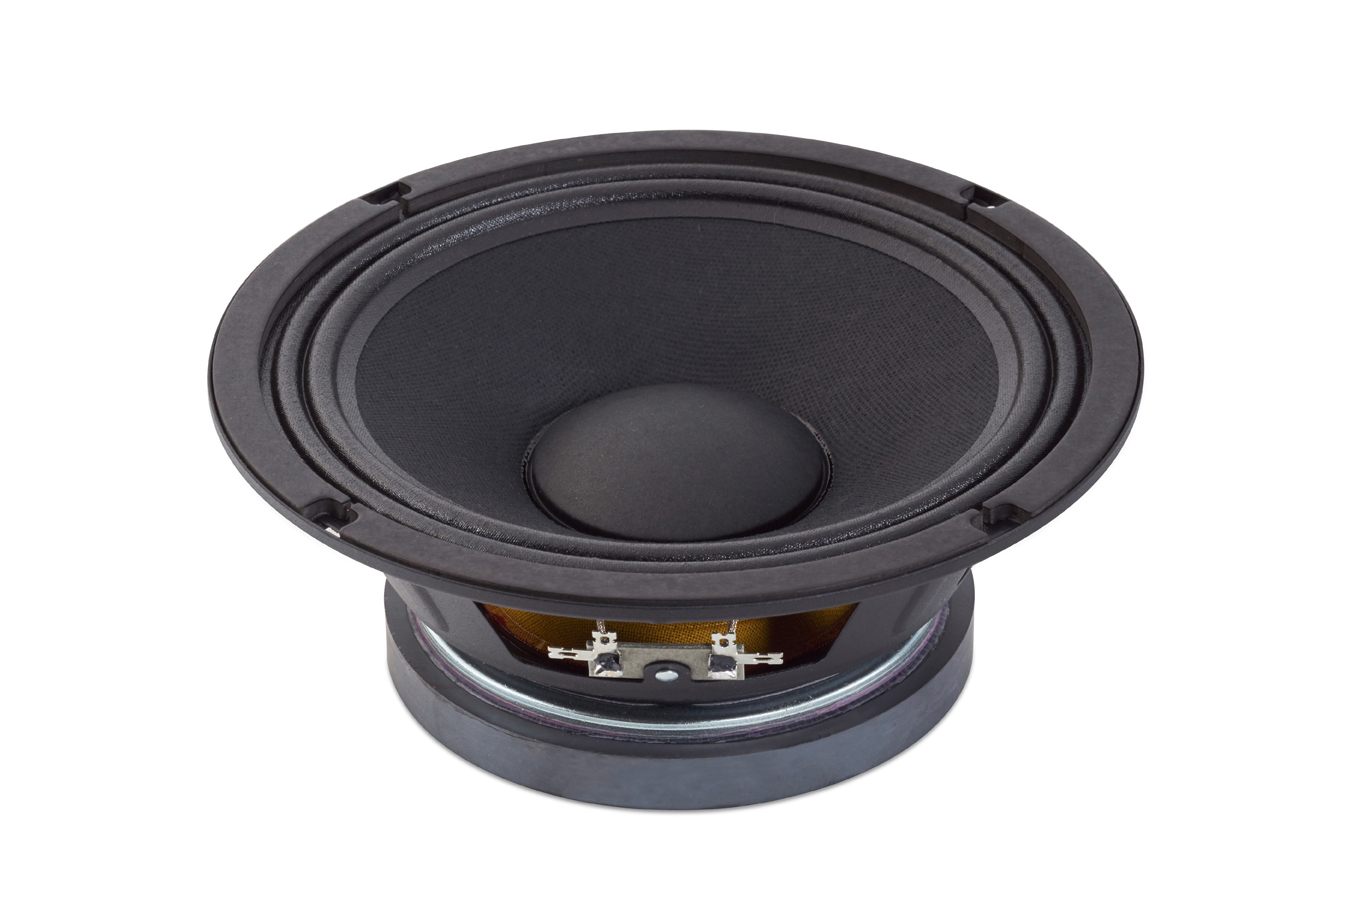 Warwick Amplification Parts - 8" Celestion Speaker TF0818 / 150 W / 8 Ohm - for WCA 208 CE-4 and WCA 408 CE-8